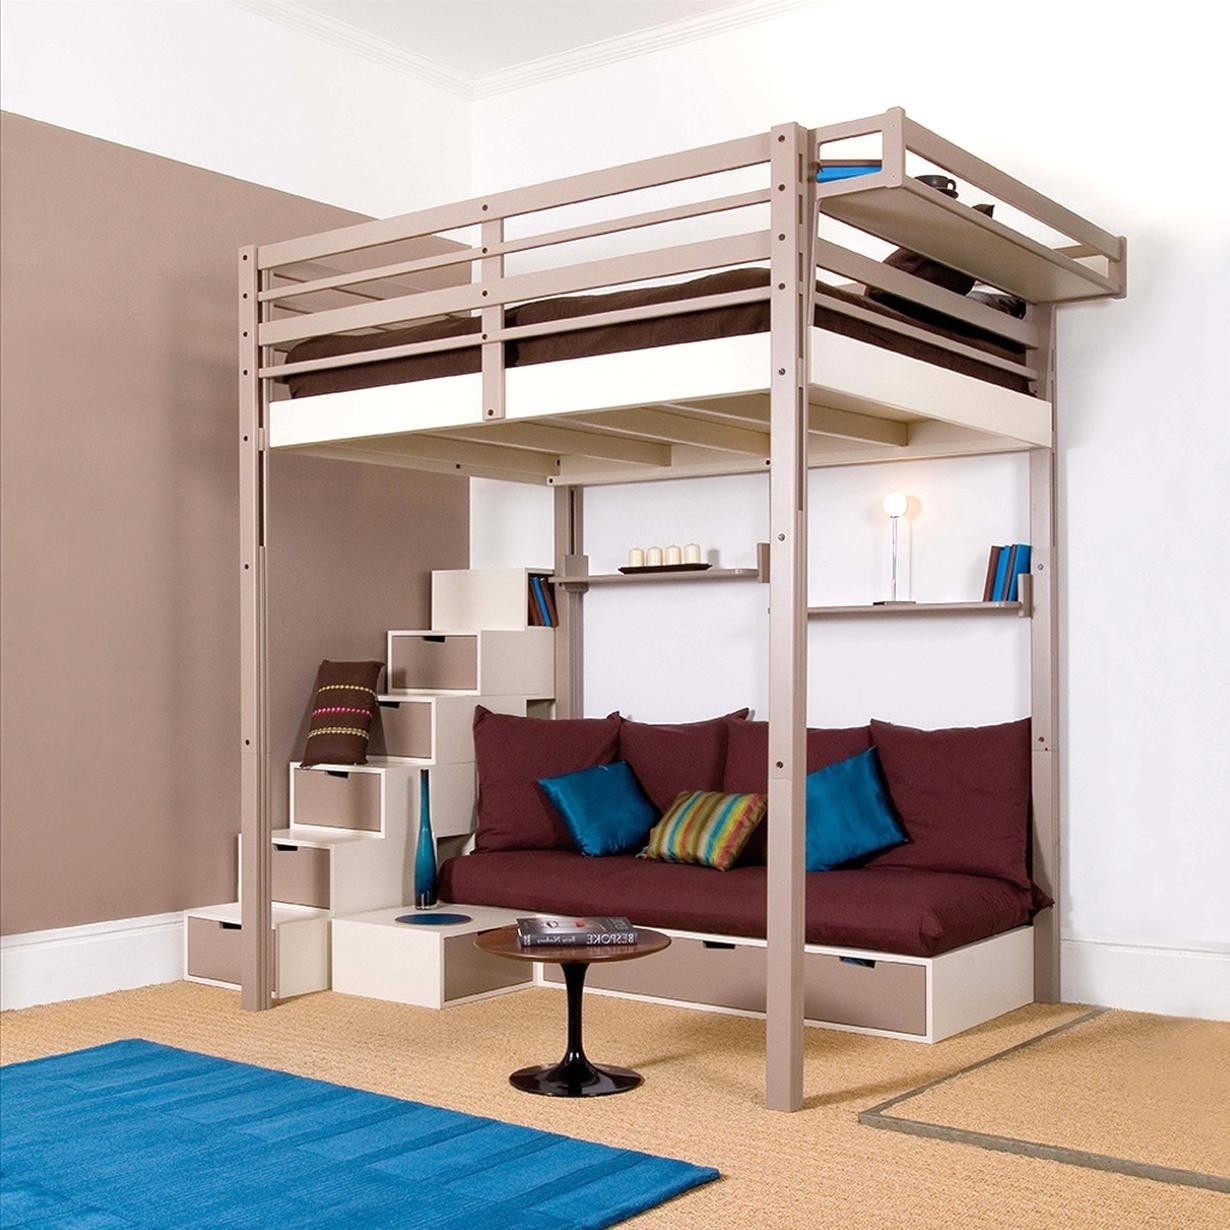 Full Size Loft Bed With Stairs Visualhunt, How To Make A Loft Bed Out Of Twine